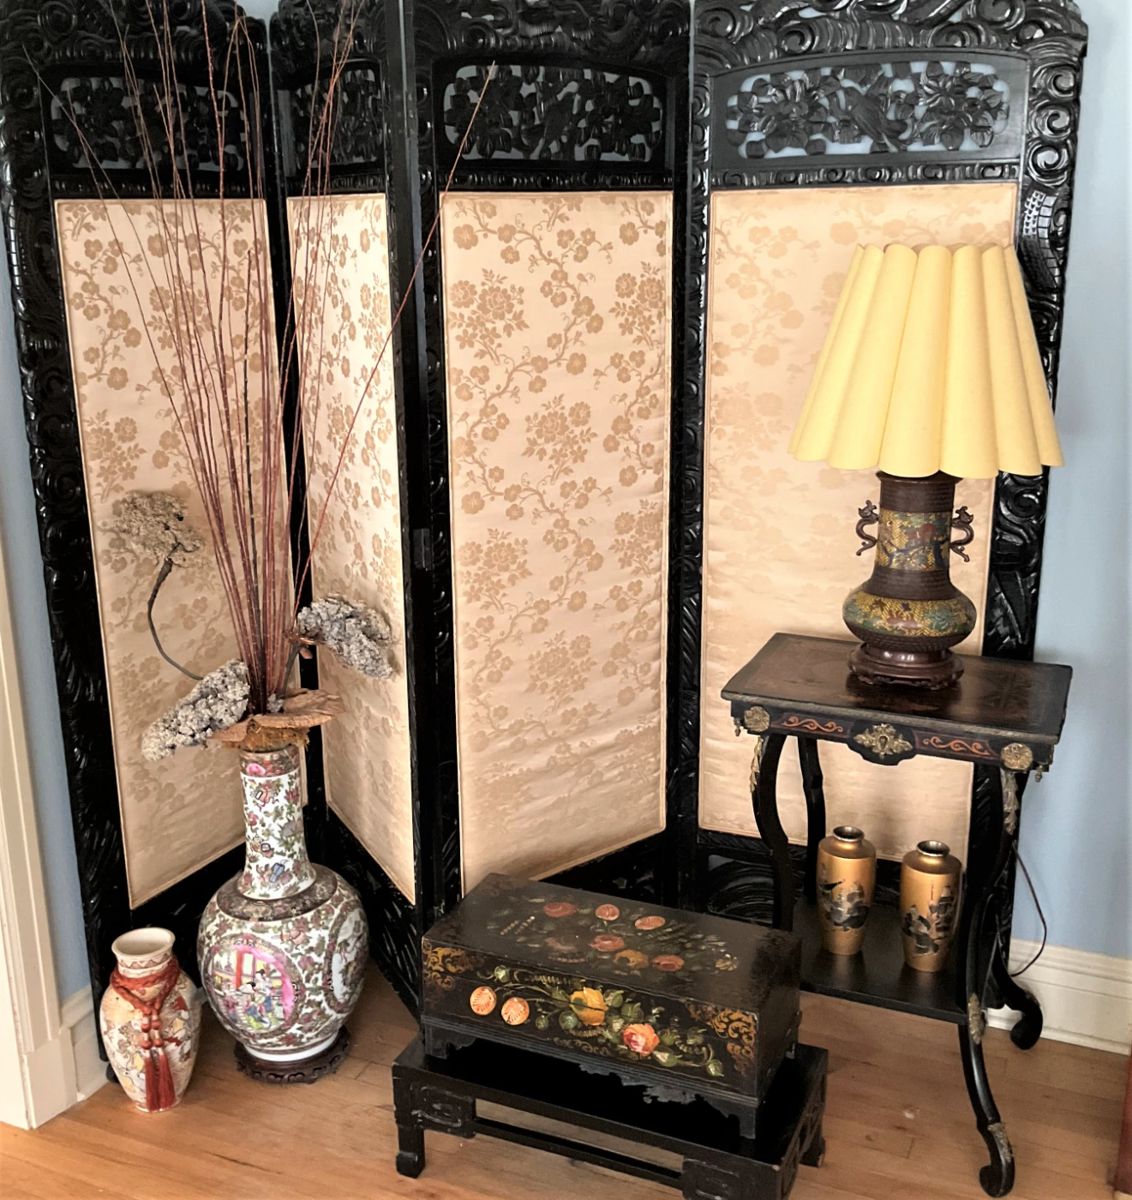 Antique 4 sectioned carved screen with upholstered fabric panels